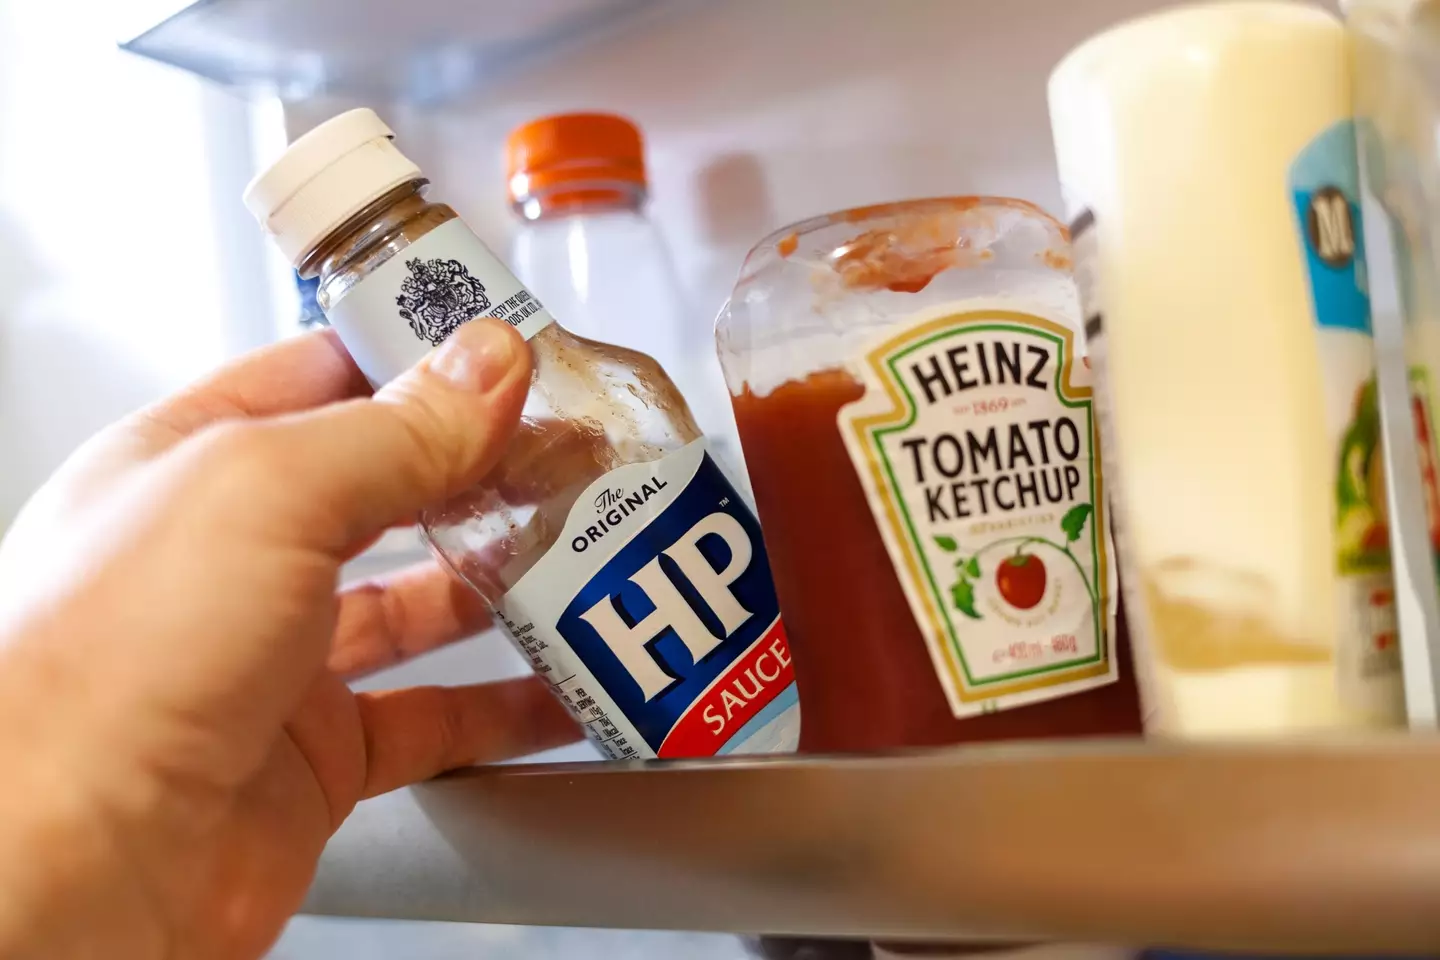 Where do you keep your condiments? (